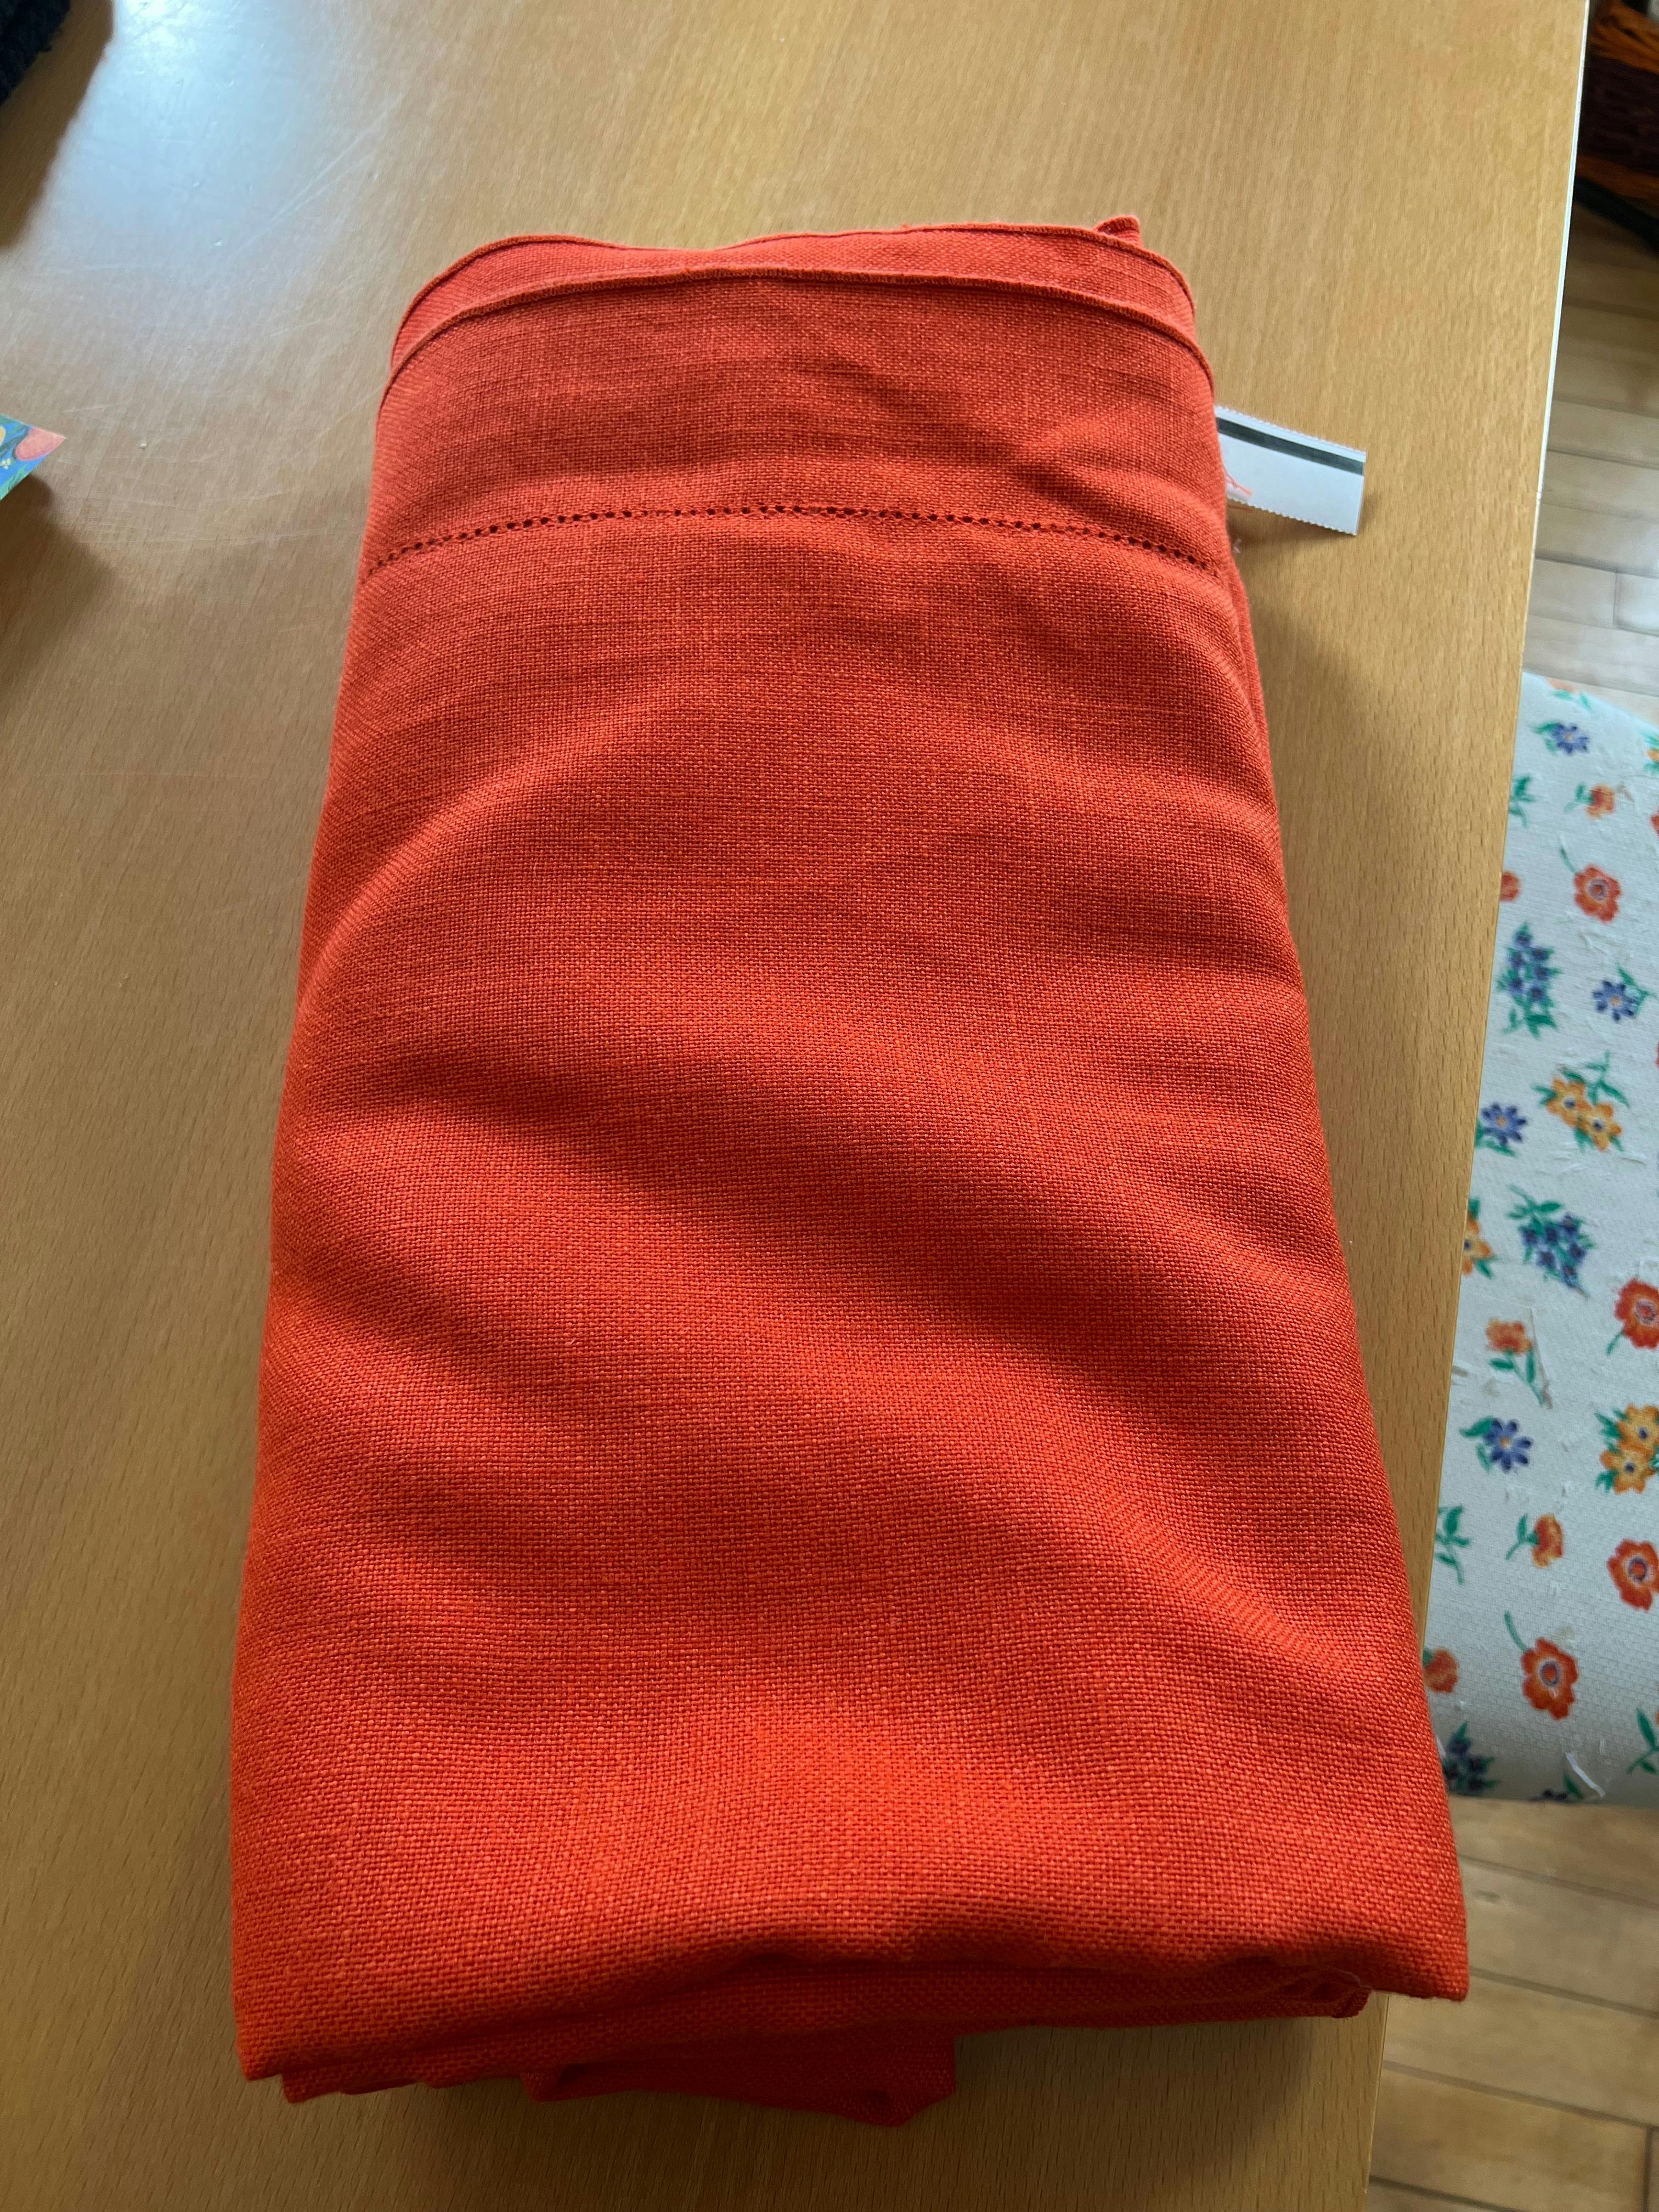 A folded up orange tablecloth with the thrift store price tag still showing